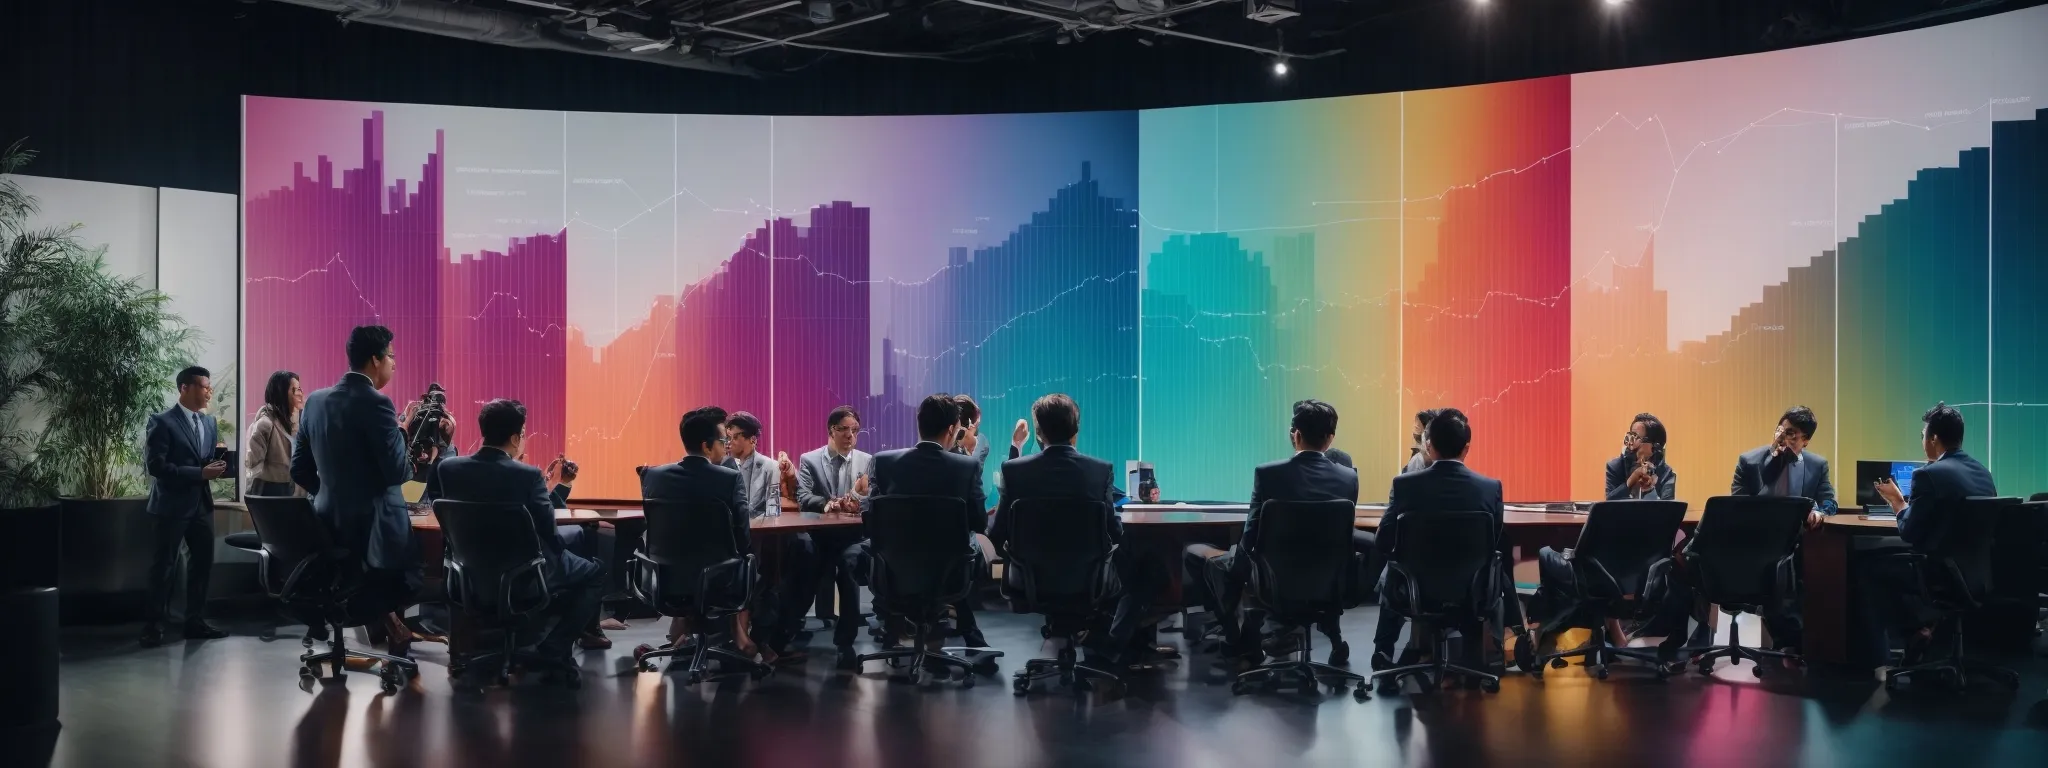 a group of professionals gathered around a large screen displaying colorful analytics graphs, intently discussing strategies.